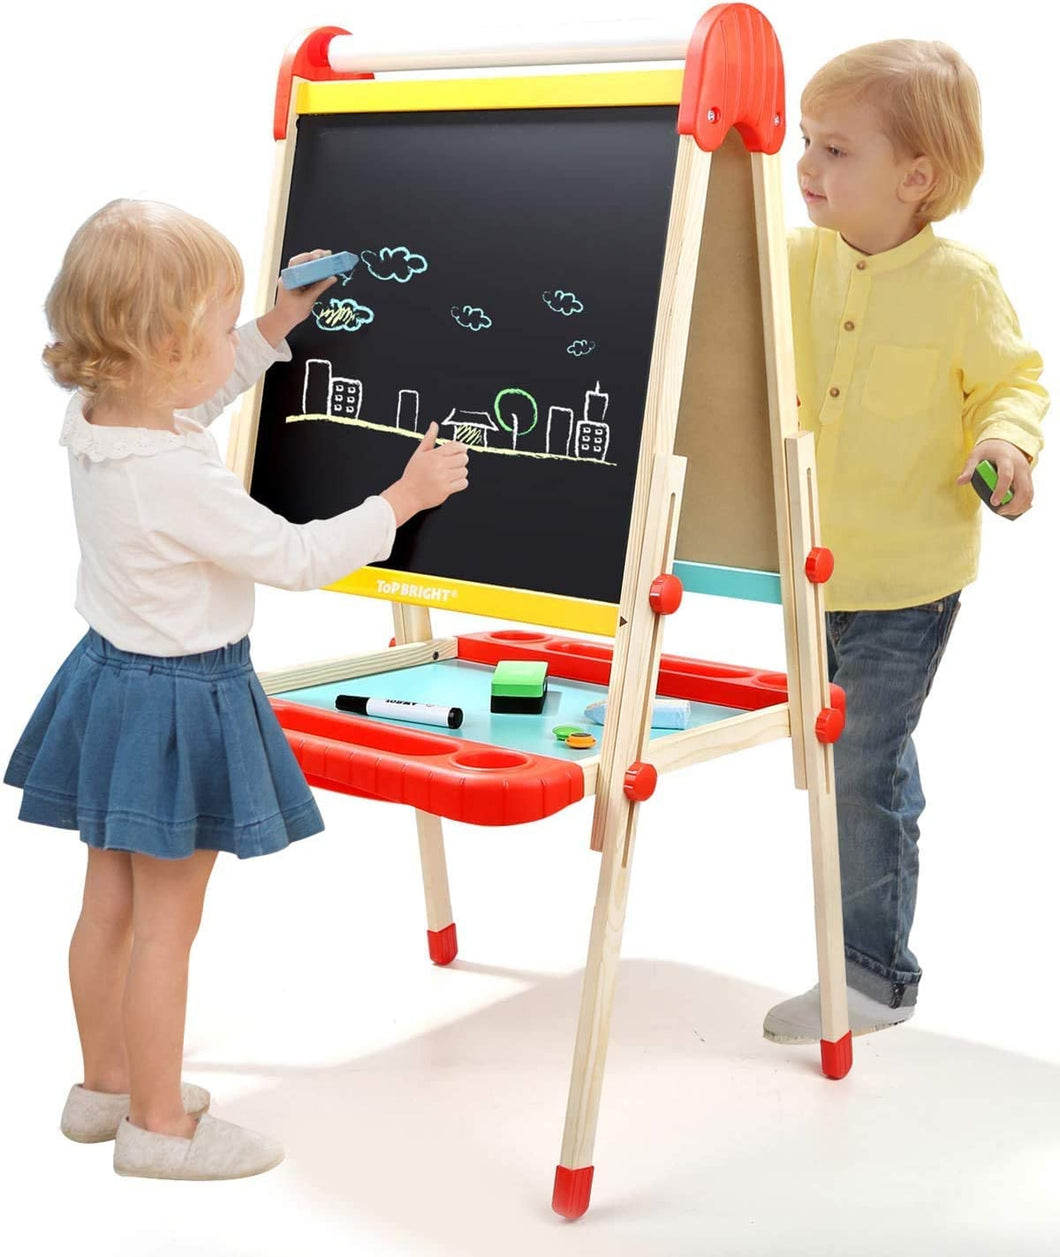 Mumoo Bear Wooden Art Easel for Kids, Toddler Easel Adjustable with Paper Roll, Child Easel with Magnetic Chalkboard